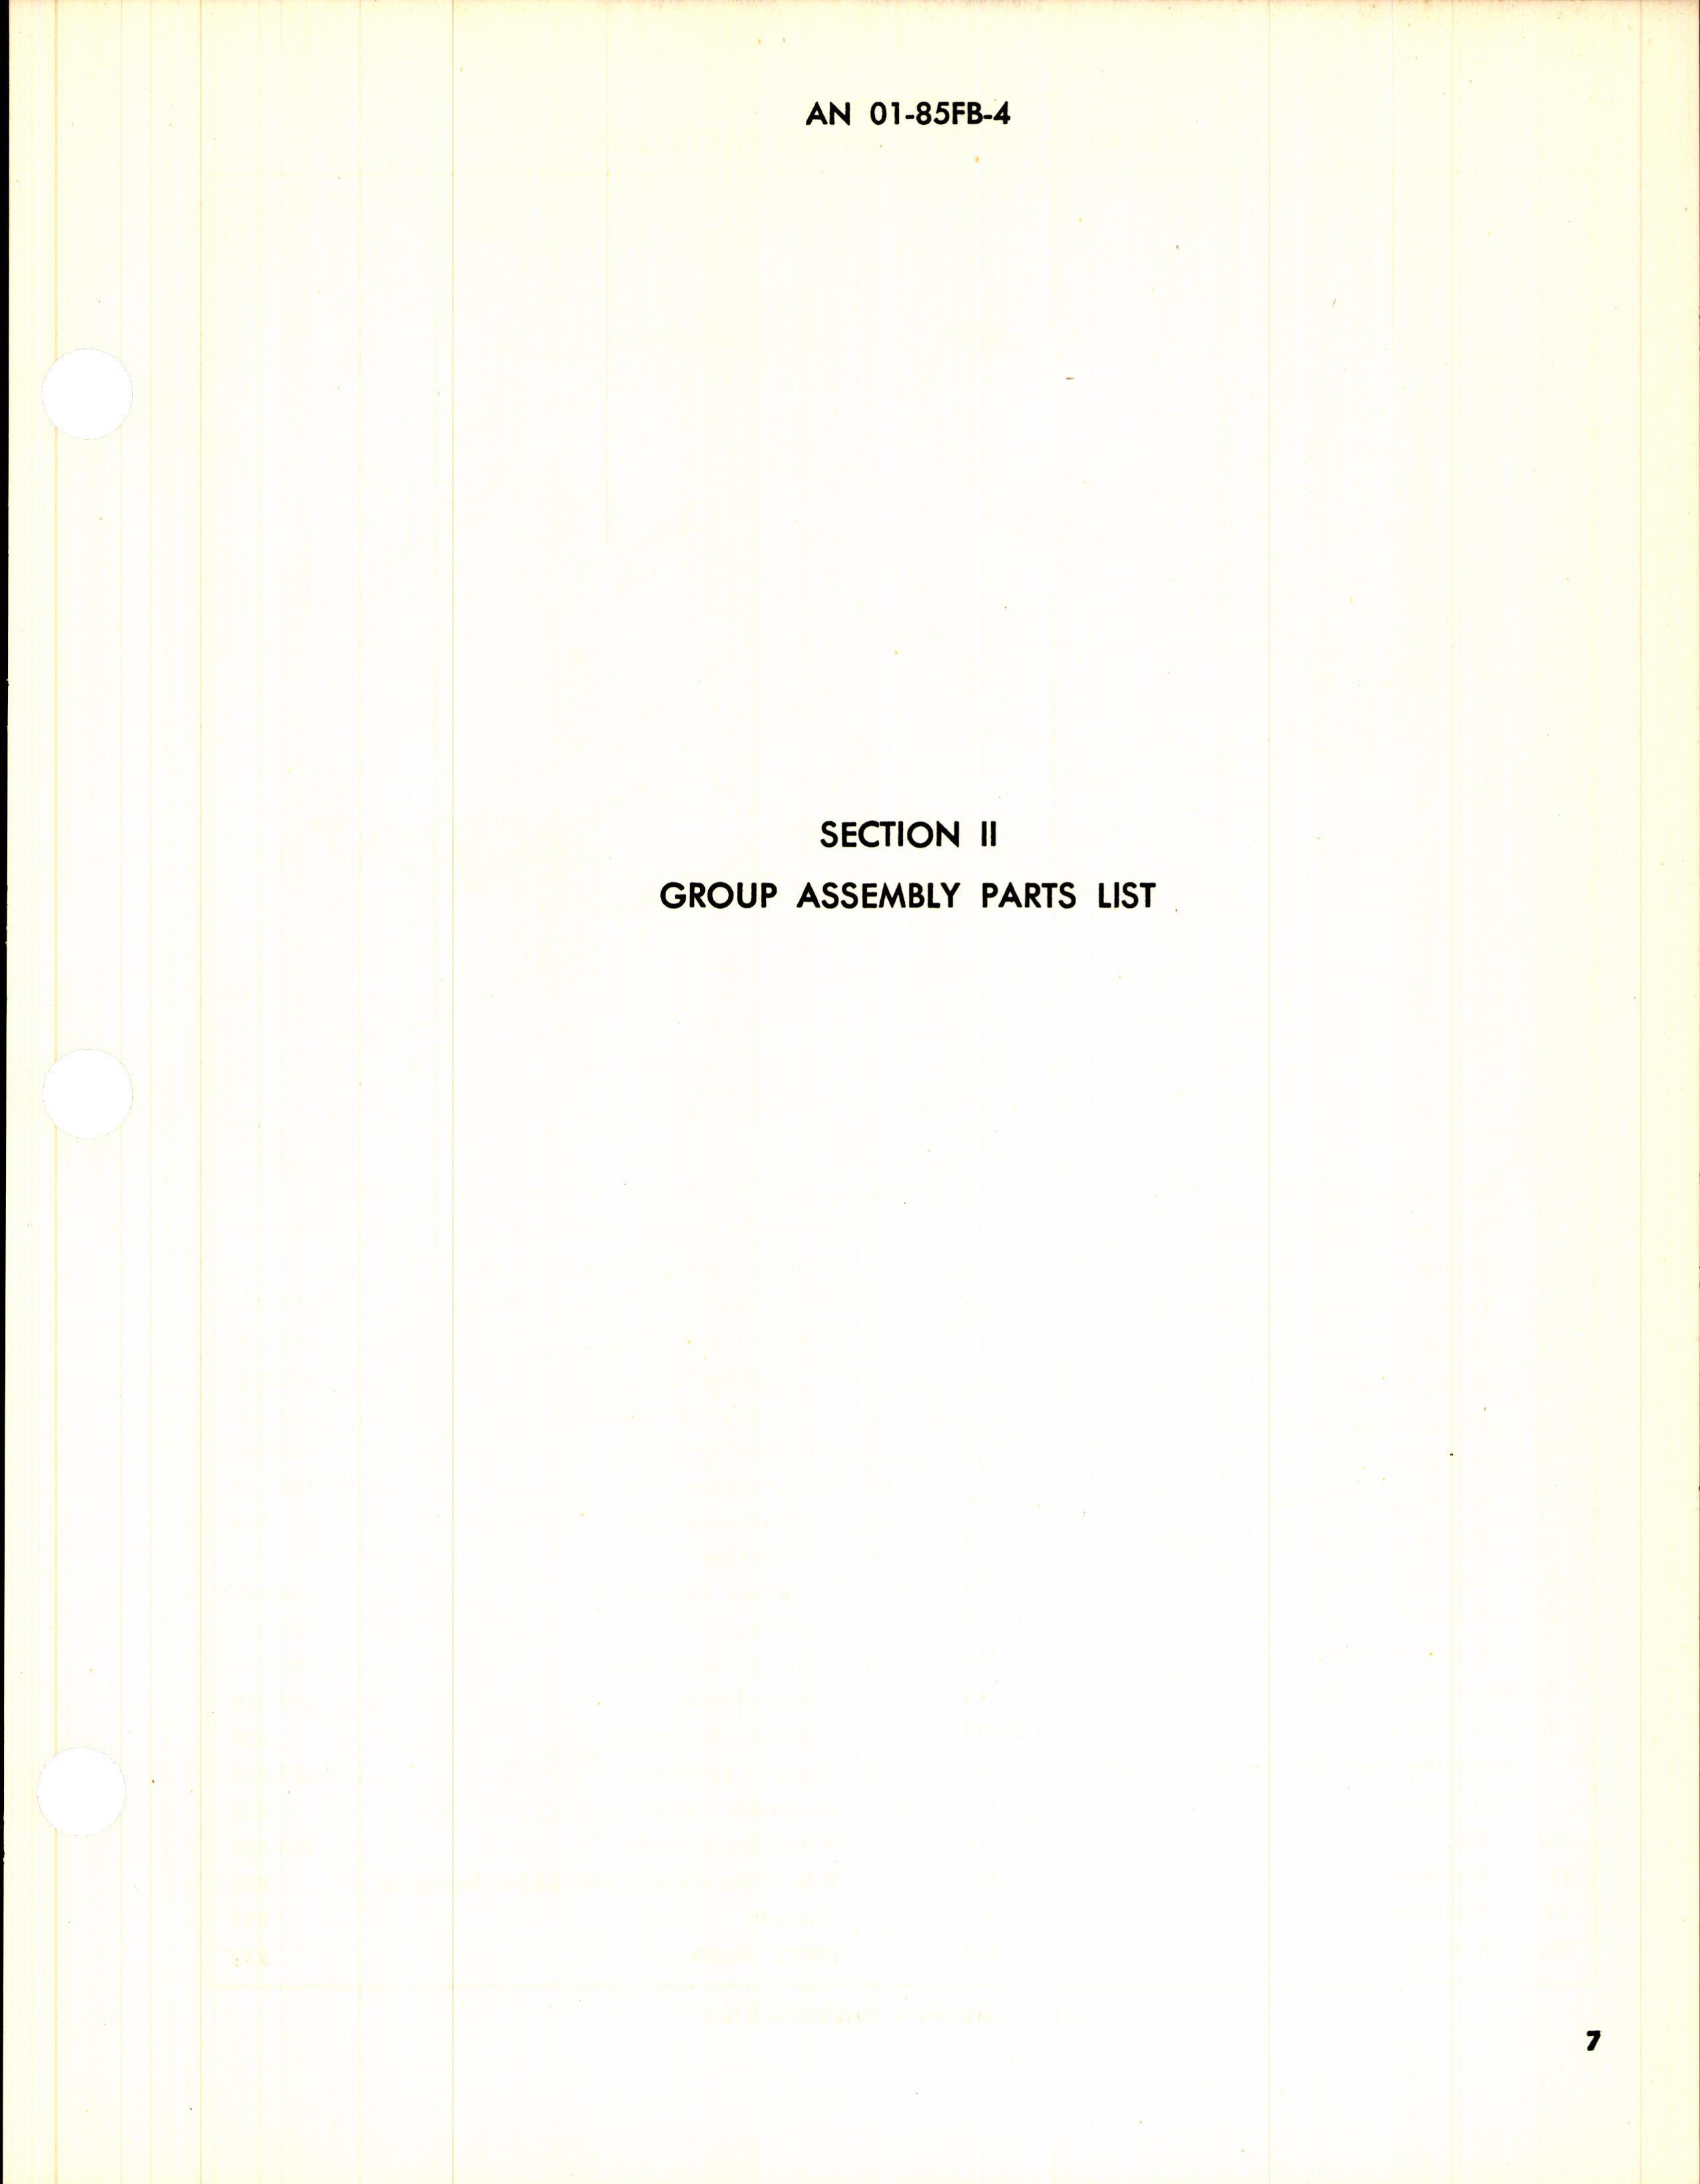 Sample page 19 from AirCorps Library document: Parts Catalog for F6F-3, F6F-3N, F6F-5, and F6F-5N